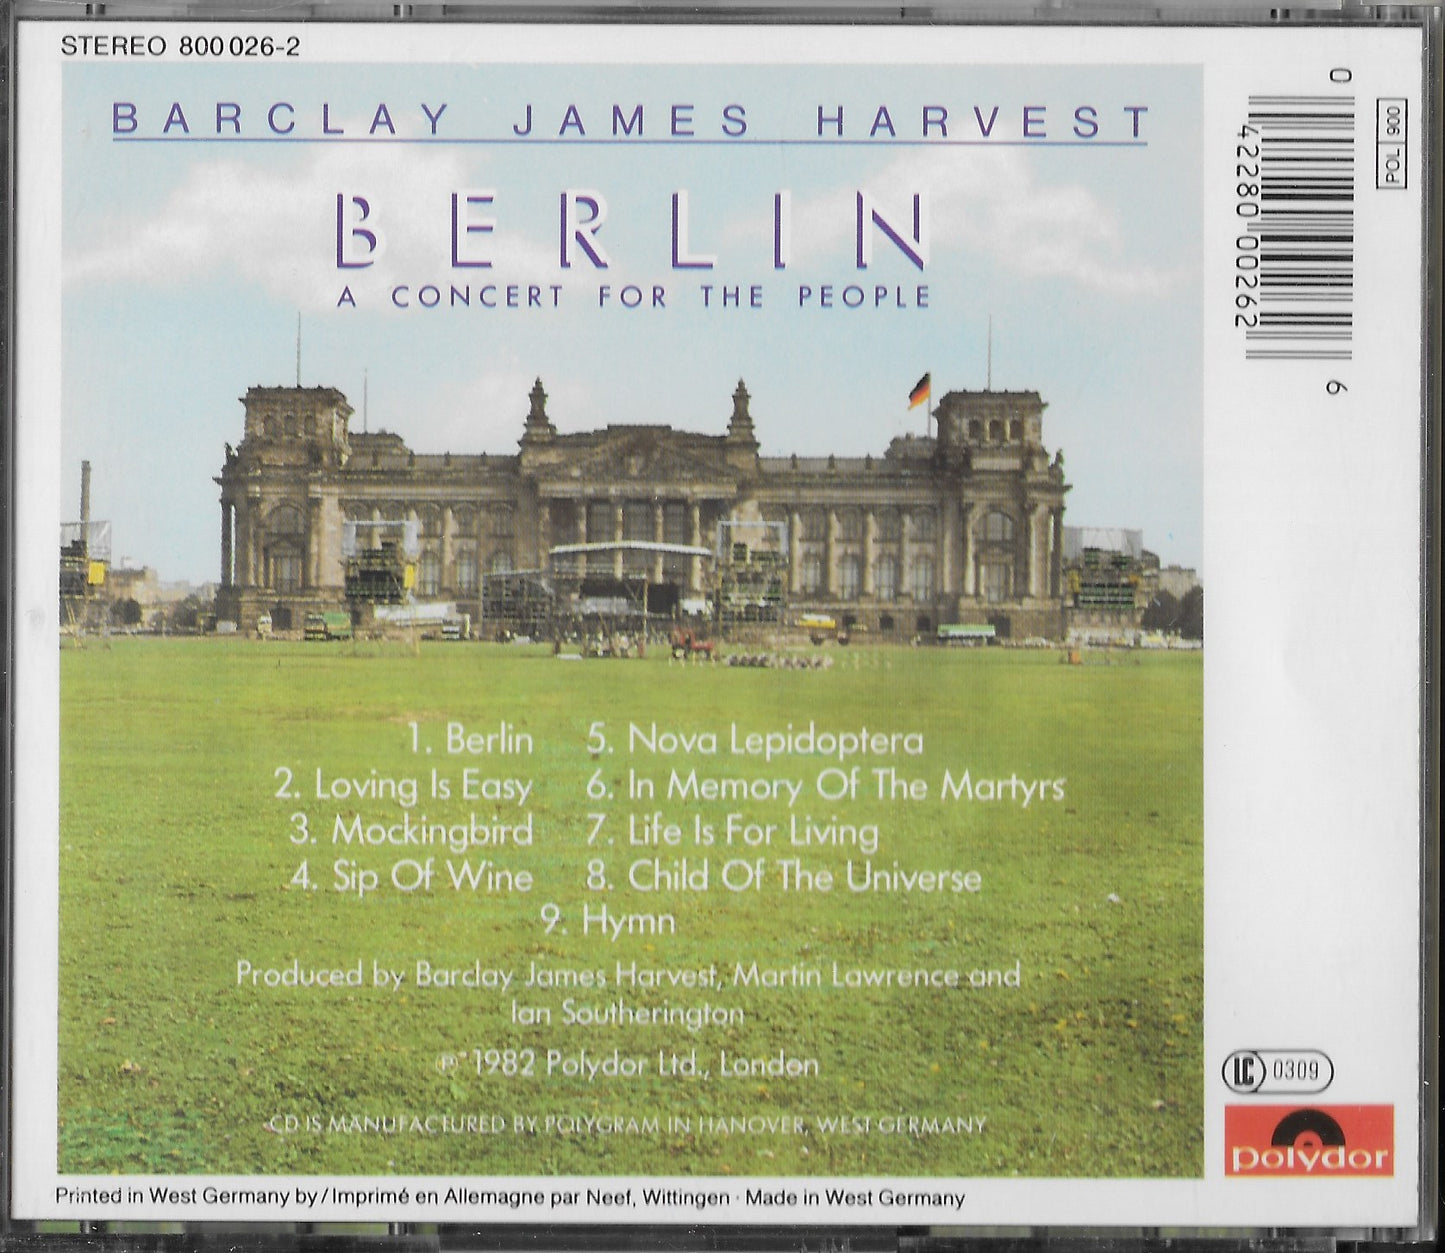 BARCLAY JAMES HARVEST - Berlin (A Concert For The People)